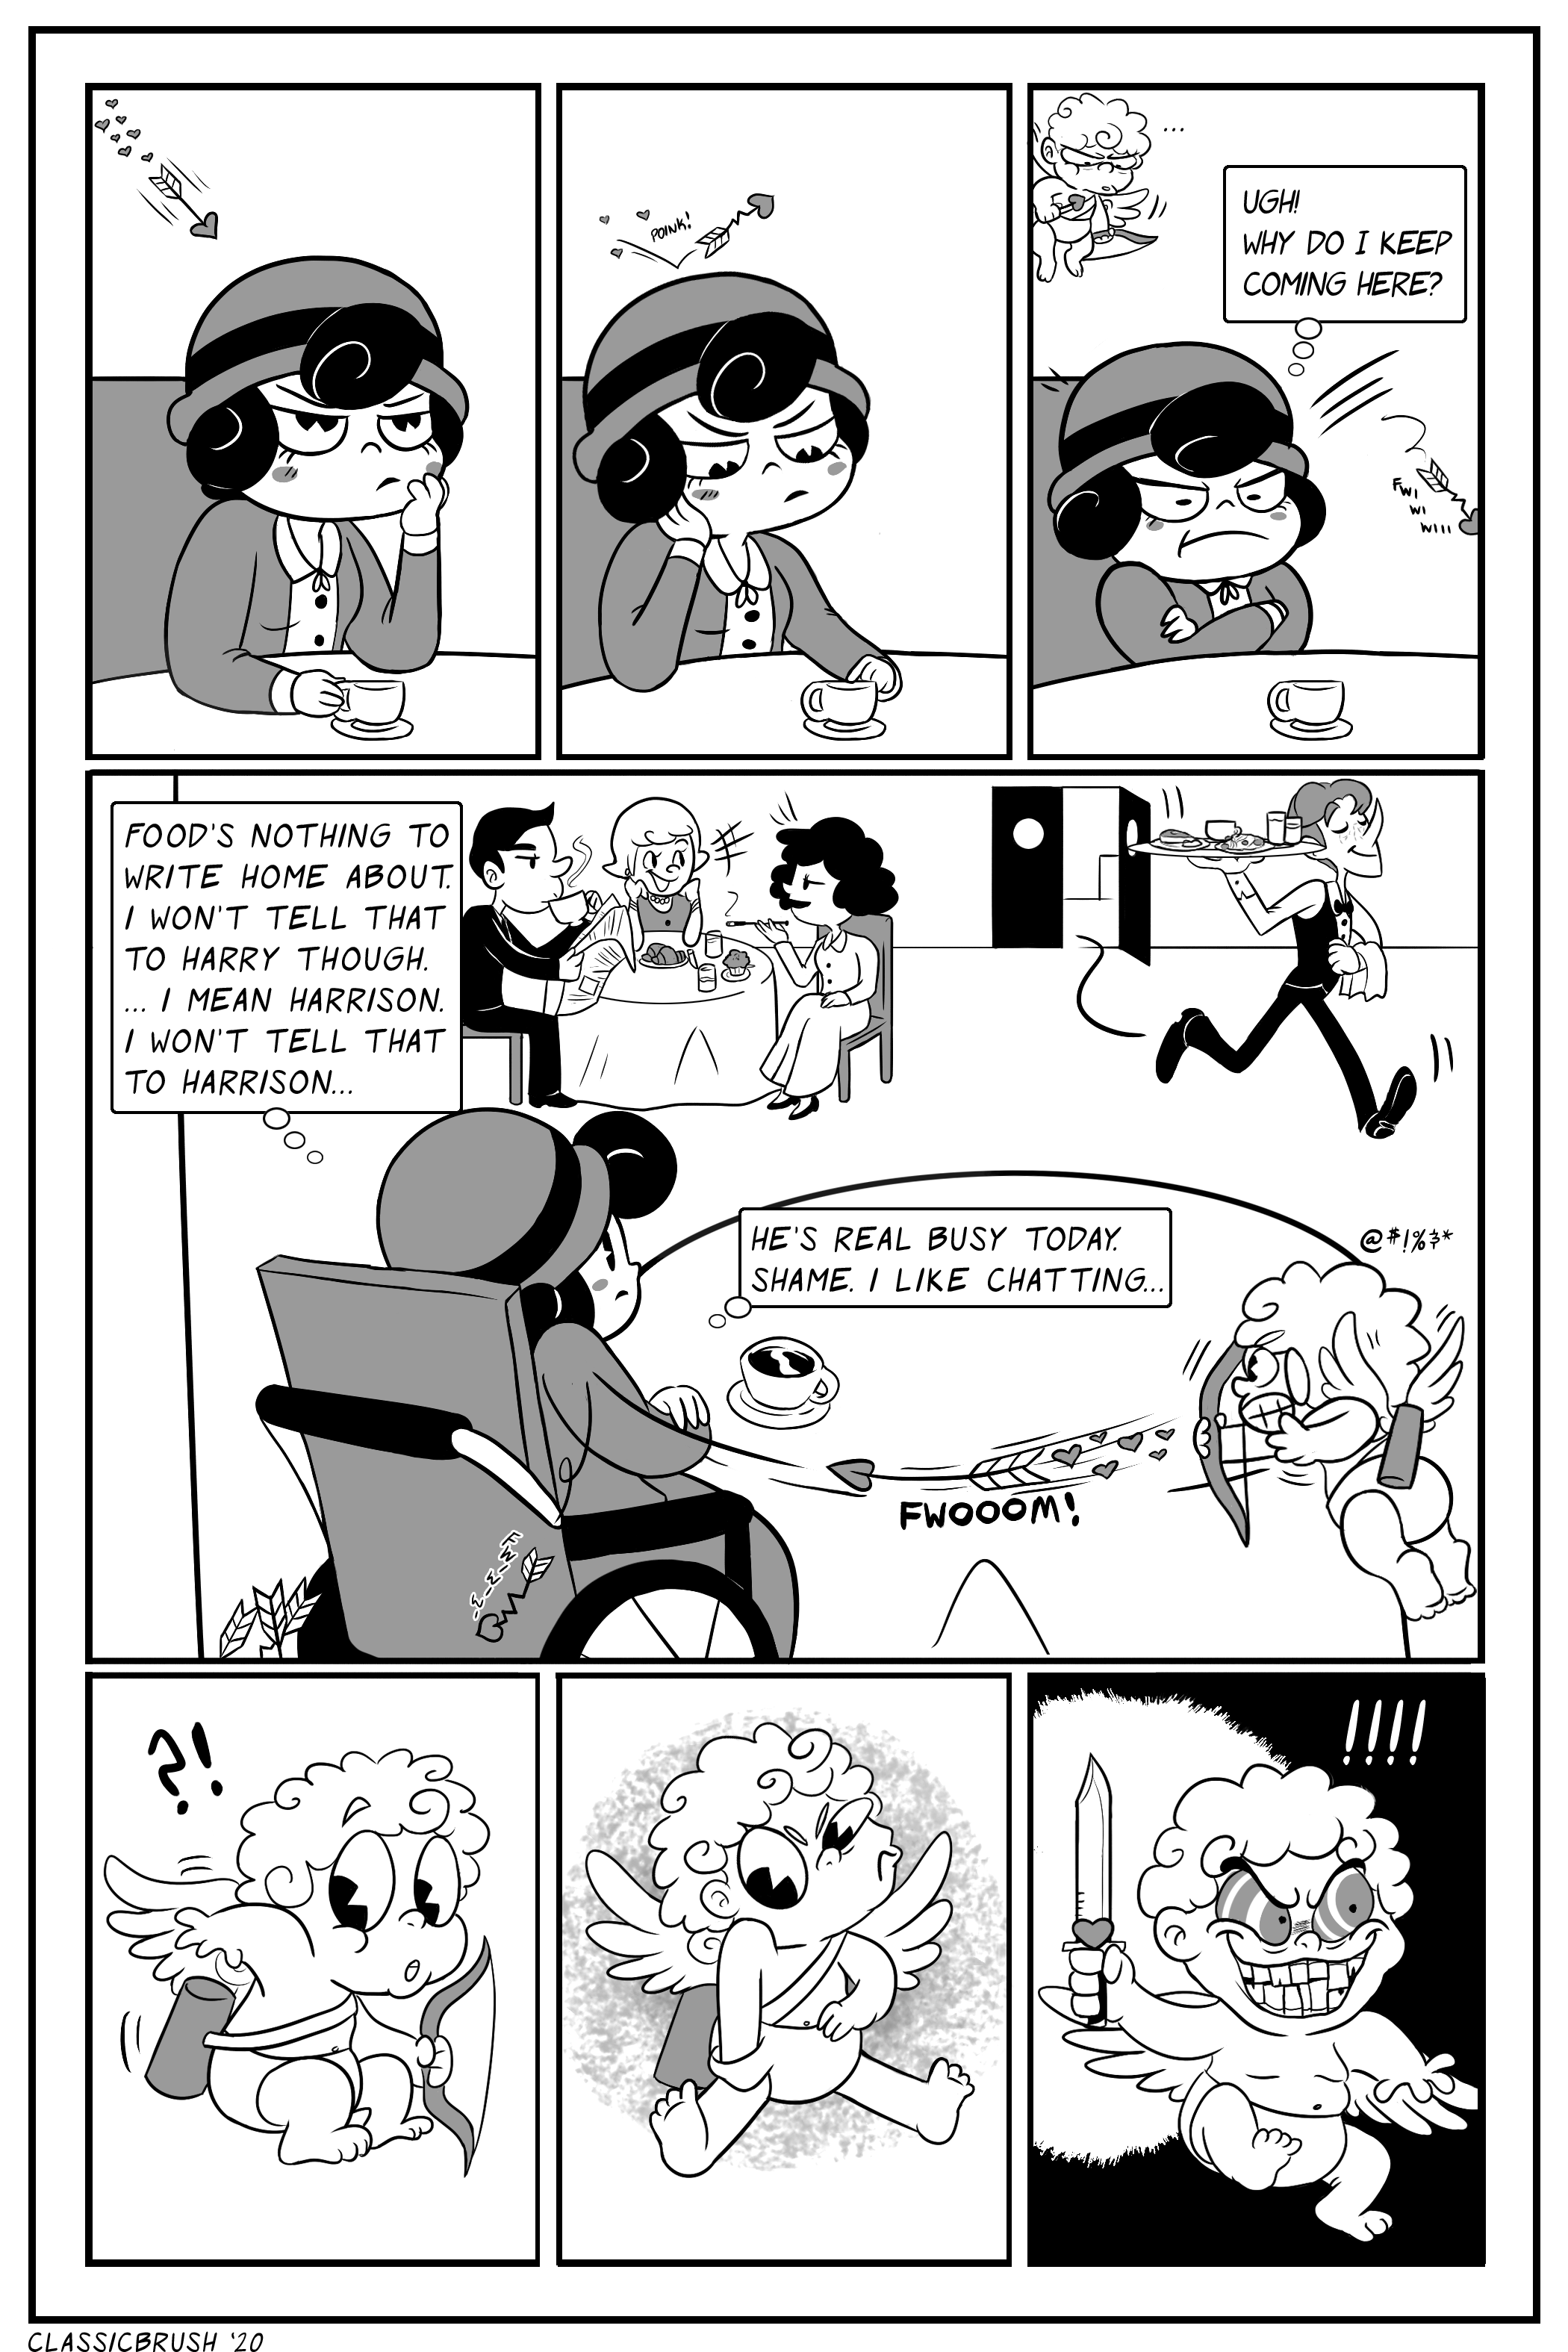 Panels 1, 2, and 3: A young woman with curly hair stares into the distance in frustration. An arrow with a heart shaped point comes flying towards her but fails to stick. A small curly haired cupid glares down at the woman as she remarks "Ugh! Why do I keep coming here?" Panel 4: The setting is a restaurant as the young woman sits hunched with arms crossed looking at a waiter passing by. "Food's nothing to write home about. I won't tell that to Harry though. ...I mean Harrison. I won't tell that to Harrison." The same cupid from prior attempts several more arrows but fails. The woman adds without noticing the cupid "He's real busy today. Shame, I like chatting." Panels 5, 6, and 7: The cupid has depleted his stock of arrows, instead digging in his pocket to pick out a knife with a heart symbol The cupid grins maniacally.